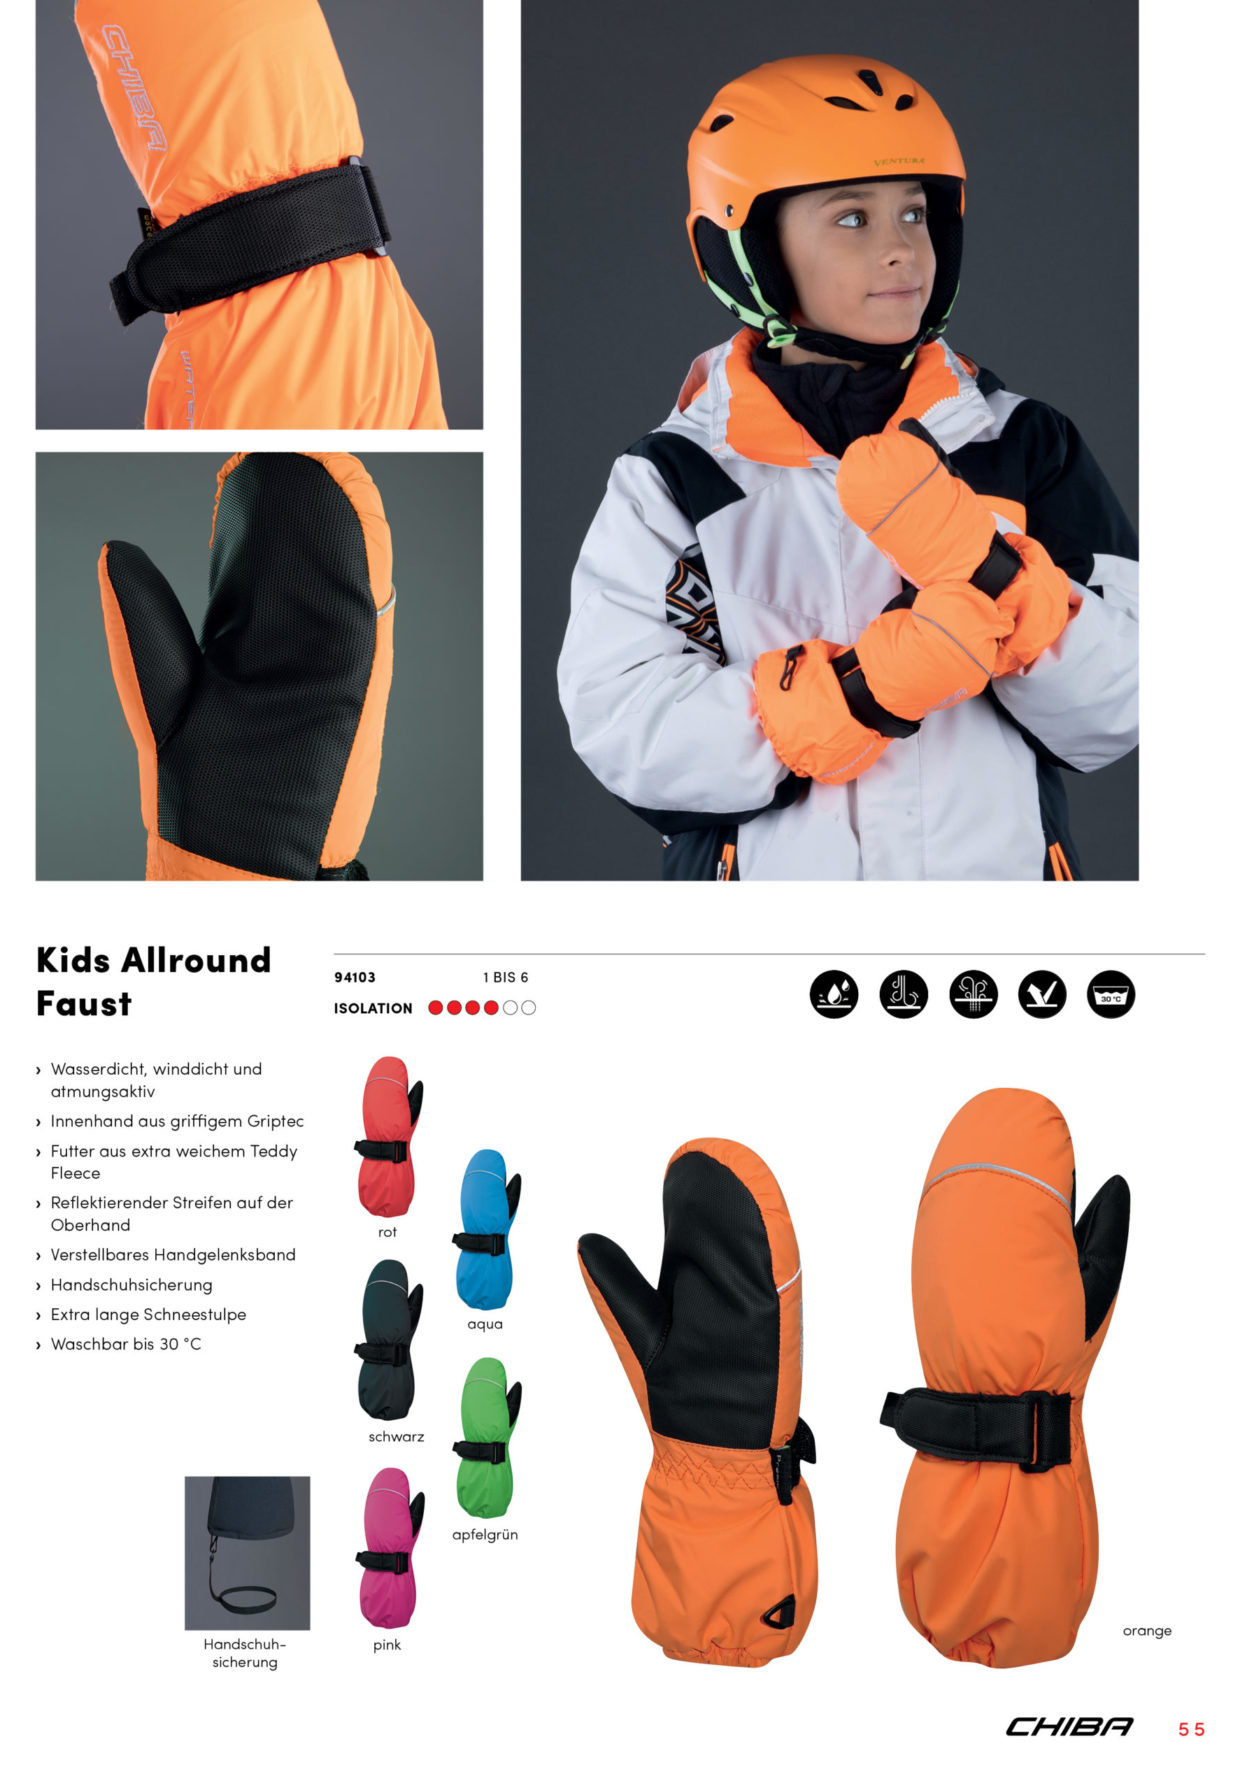 CHIBA Winter Sports Collection55